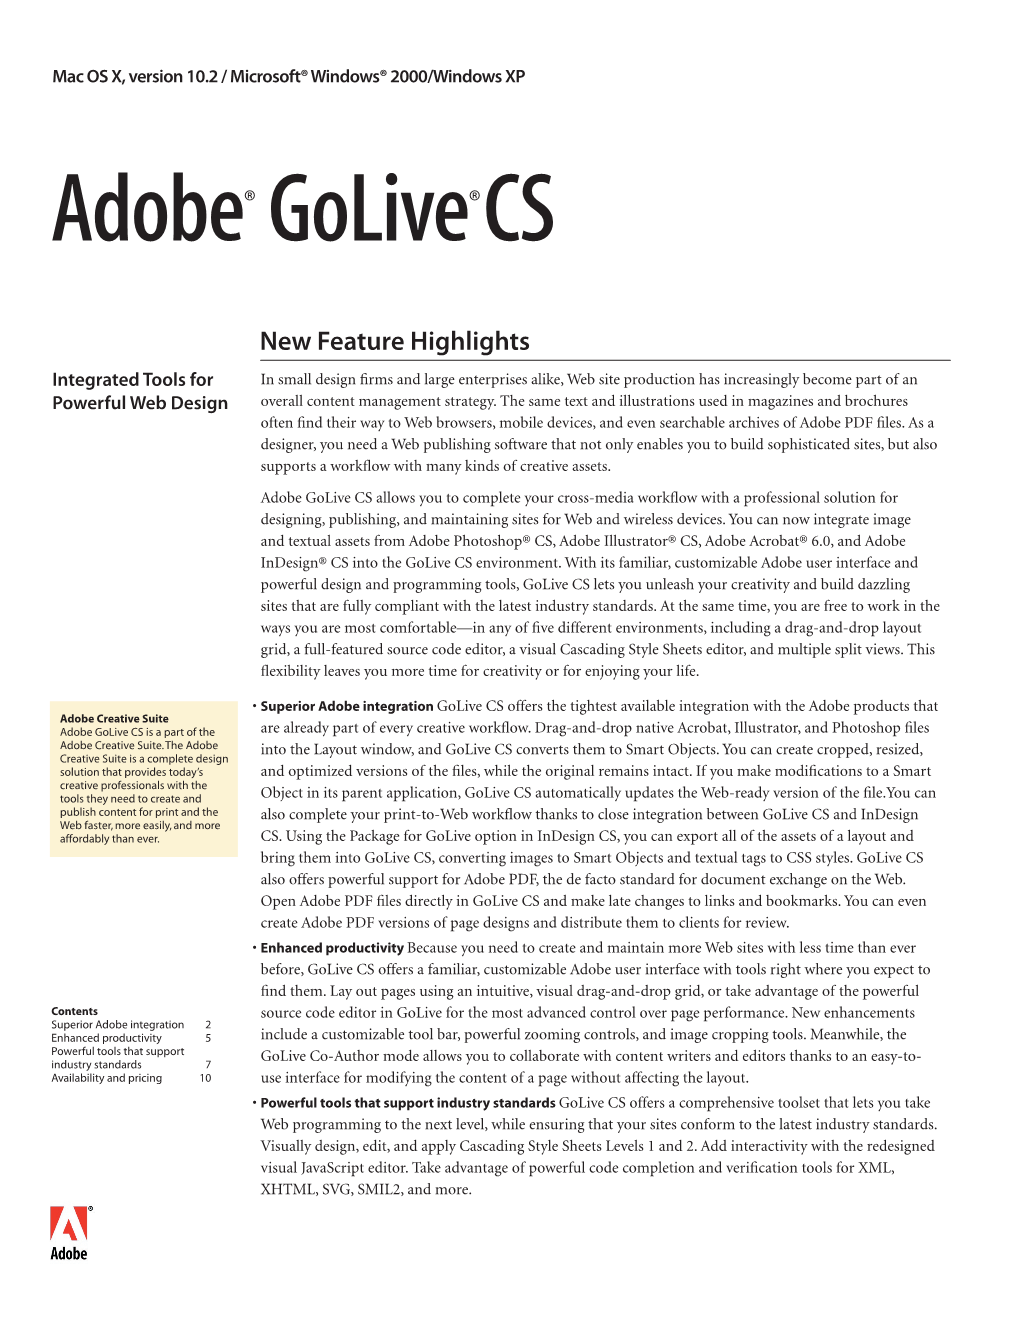 Adobe Golive CS New Feature Highlights